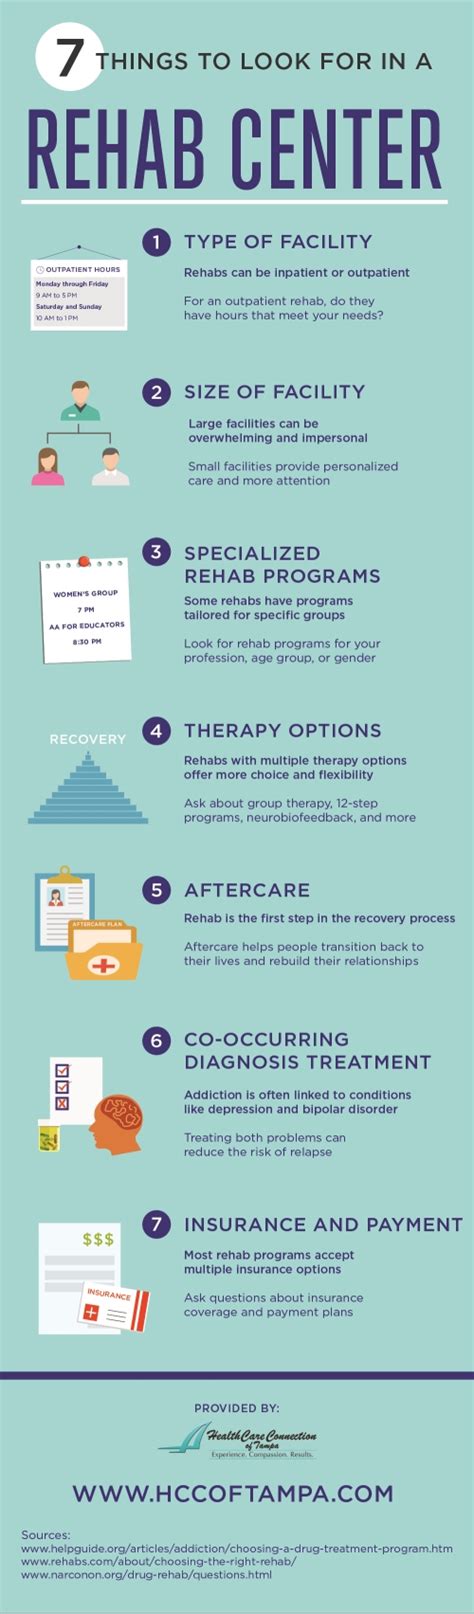 Rehab Is One Step In The Process Of Recovery But Aftercare Is Just As